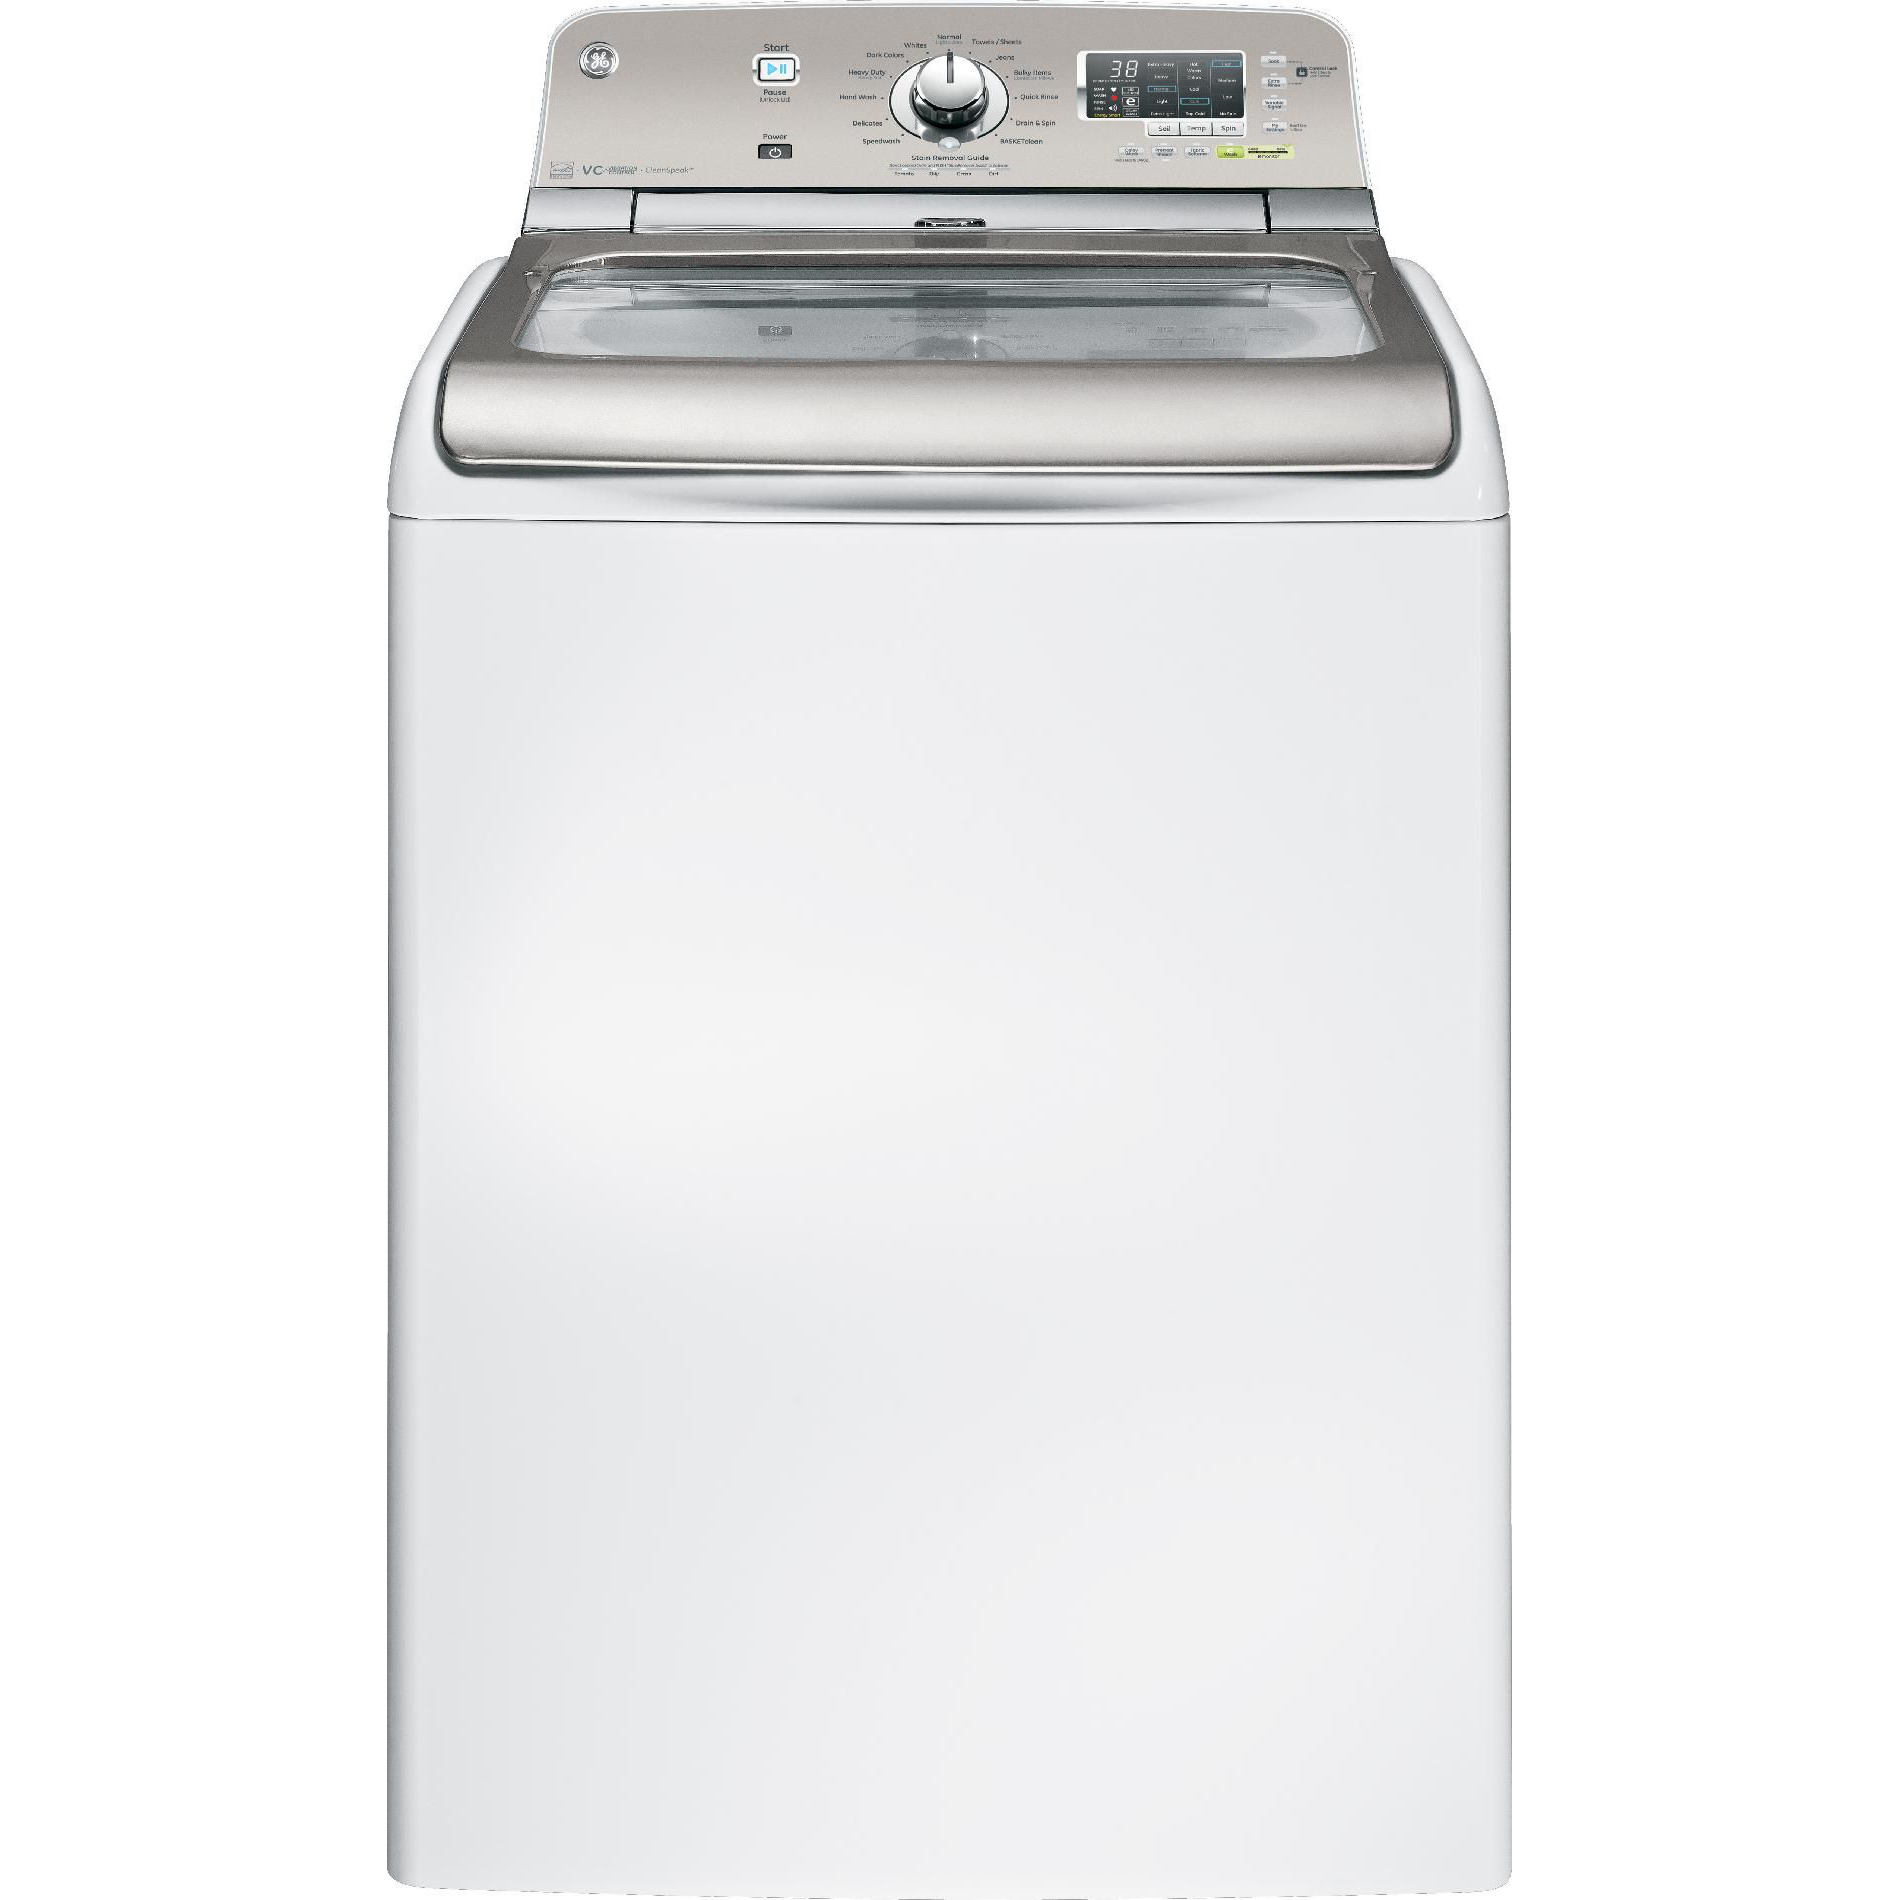 GE Top Load Washer 4.8 cu. ft. GTWN8250DWS 